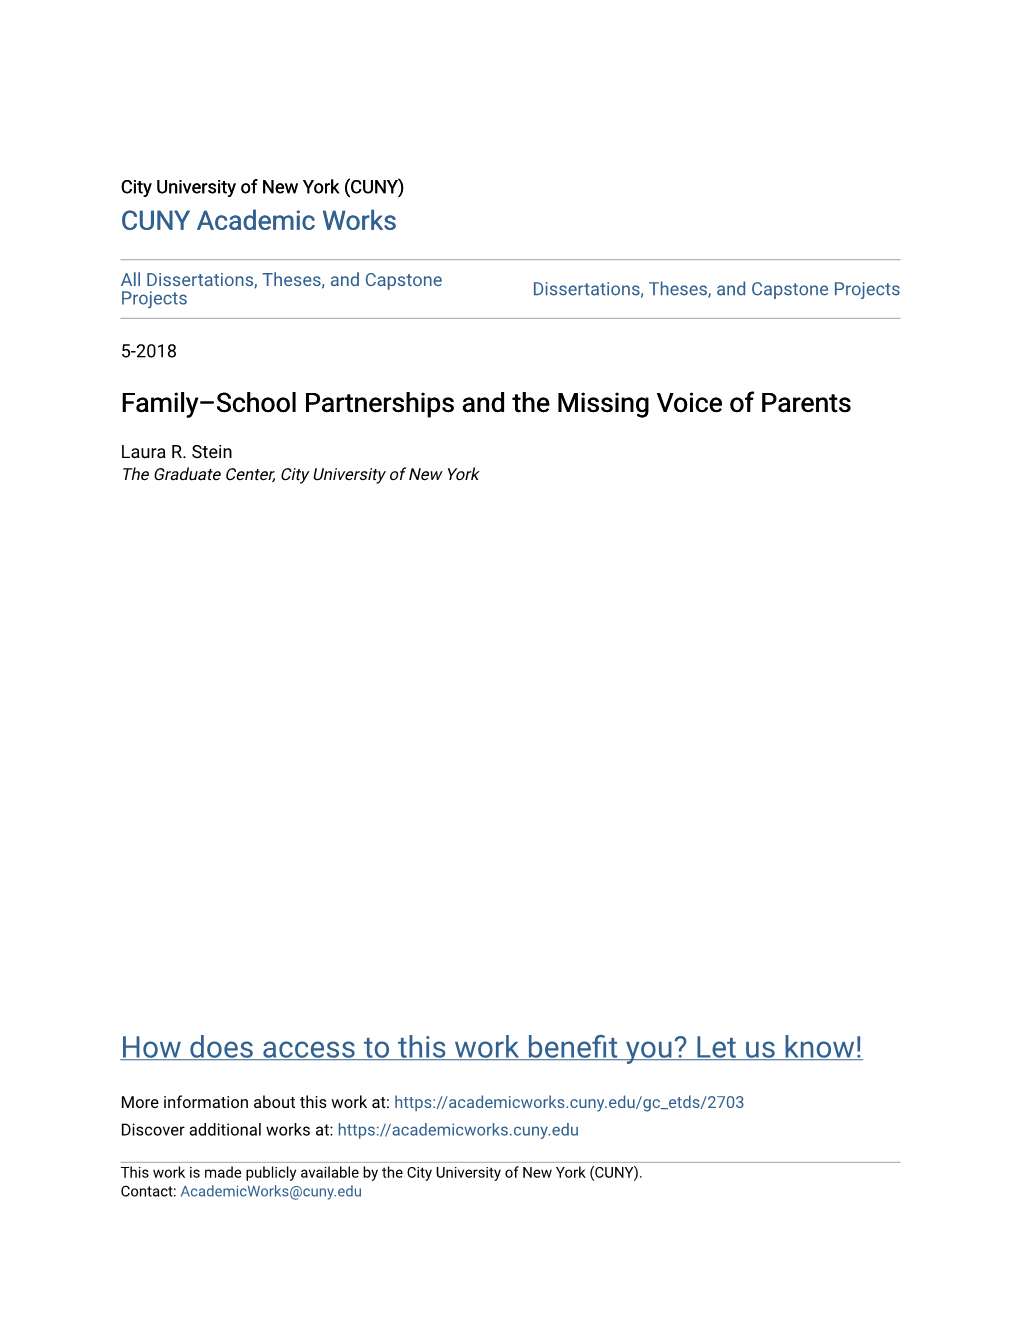 Family–School Partnerships and the Missing Voice of Parents